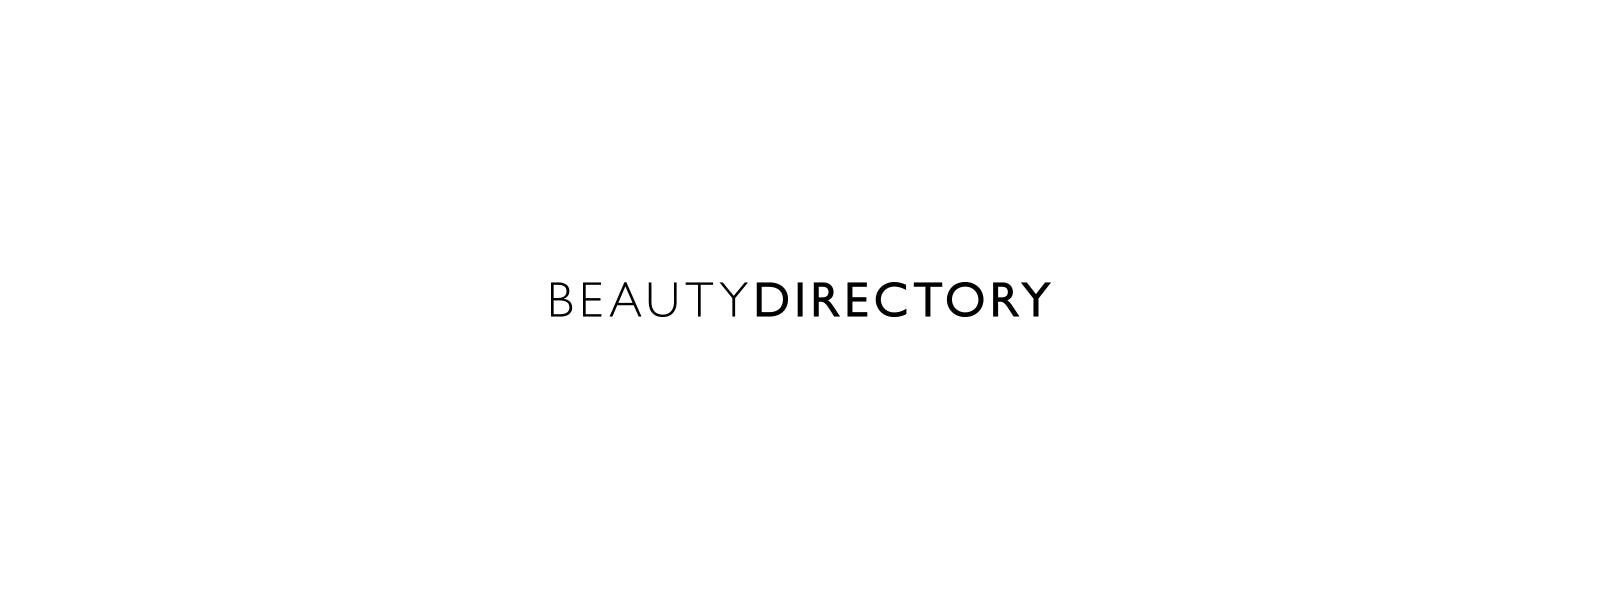 BEAUTYDIRECTORY — BD's guide to pregnancy-safe mum & baby care